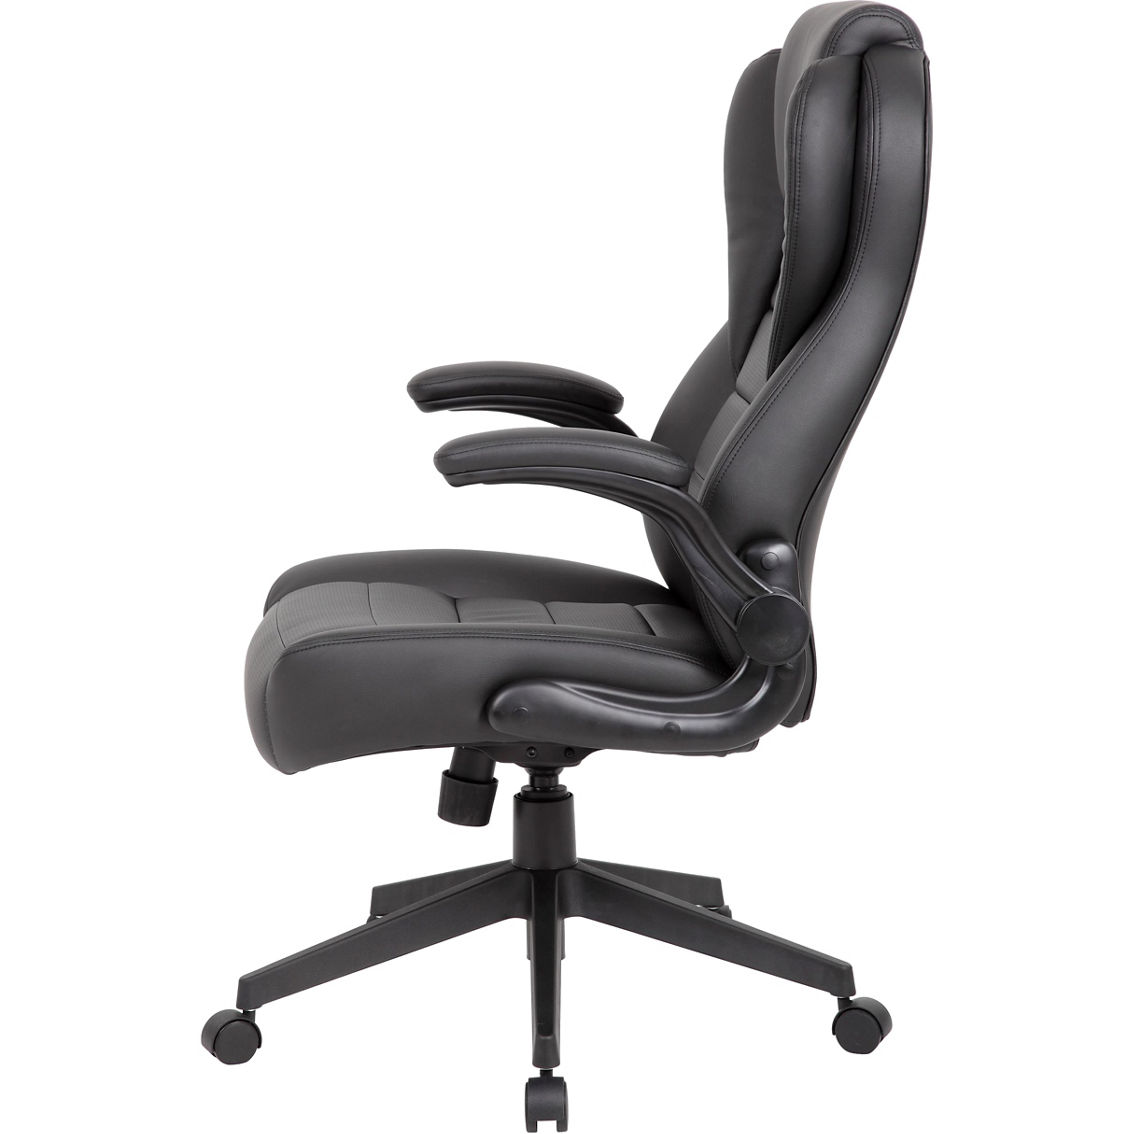 Presidential Seating Boss Executive High Back CaressoftPlus Flip Arm Chair - Image 3 of 4